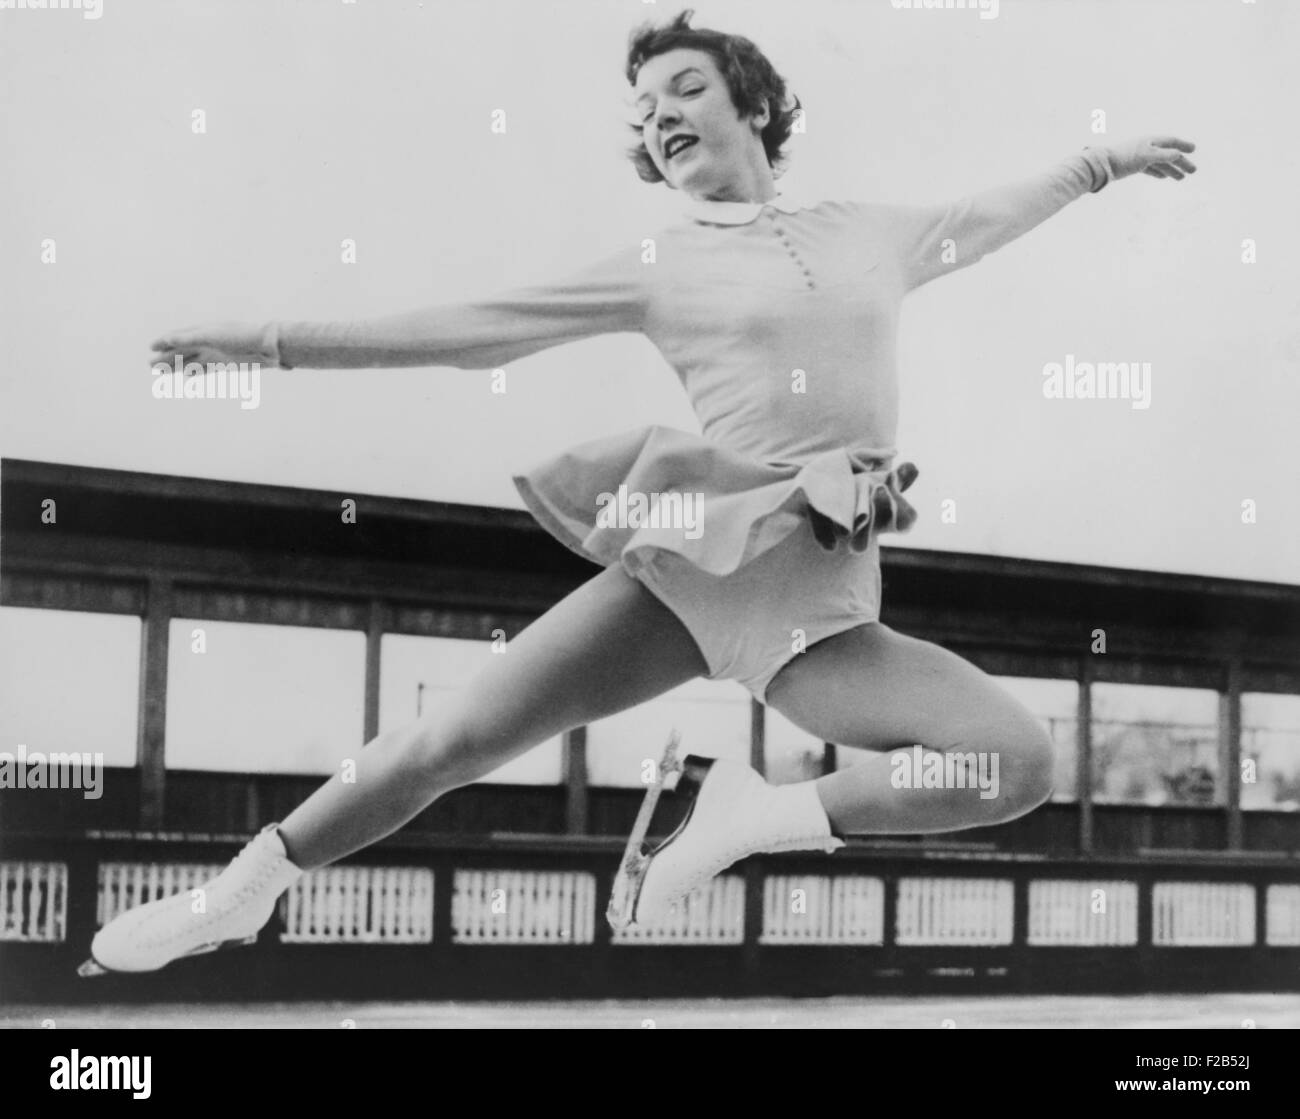 Tenley Albright, figure skater, in mid-air leap, 1954. In 1956 she became the first American to win the Olympic Women's Figure skating gold medal. - (BSLOC 2015 1 125) Stock Photo